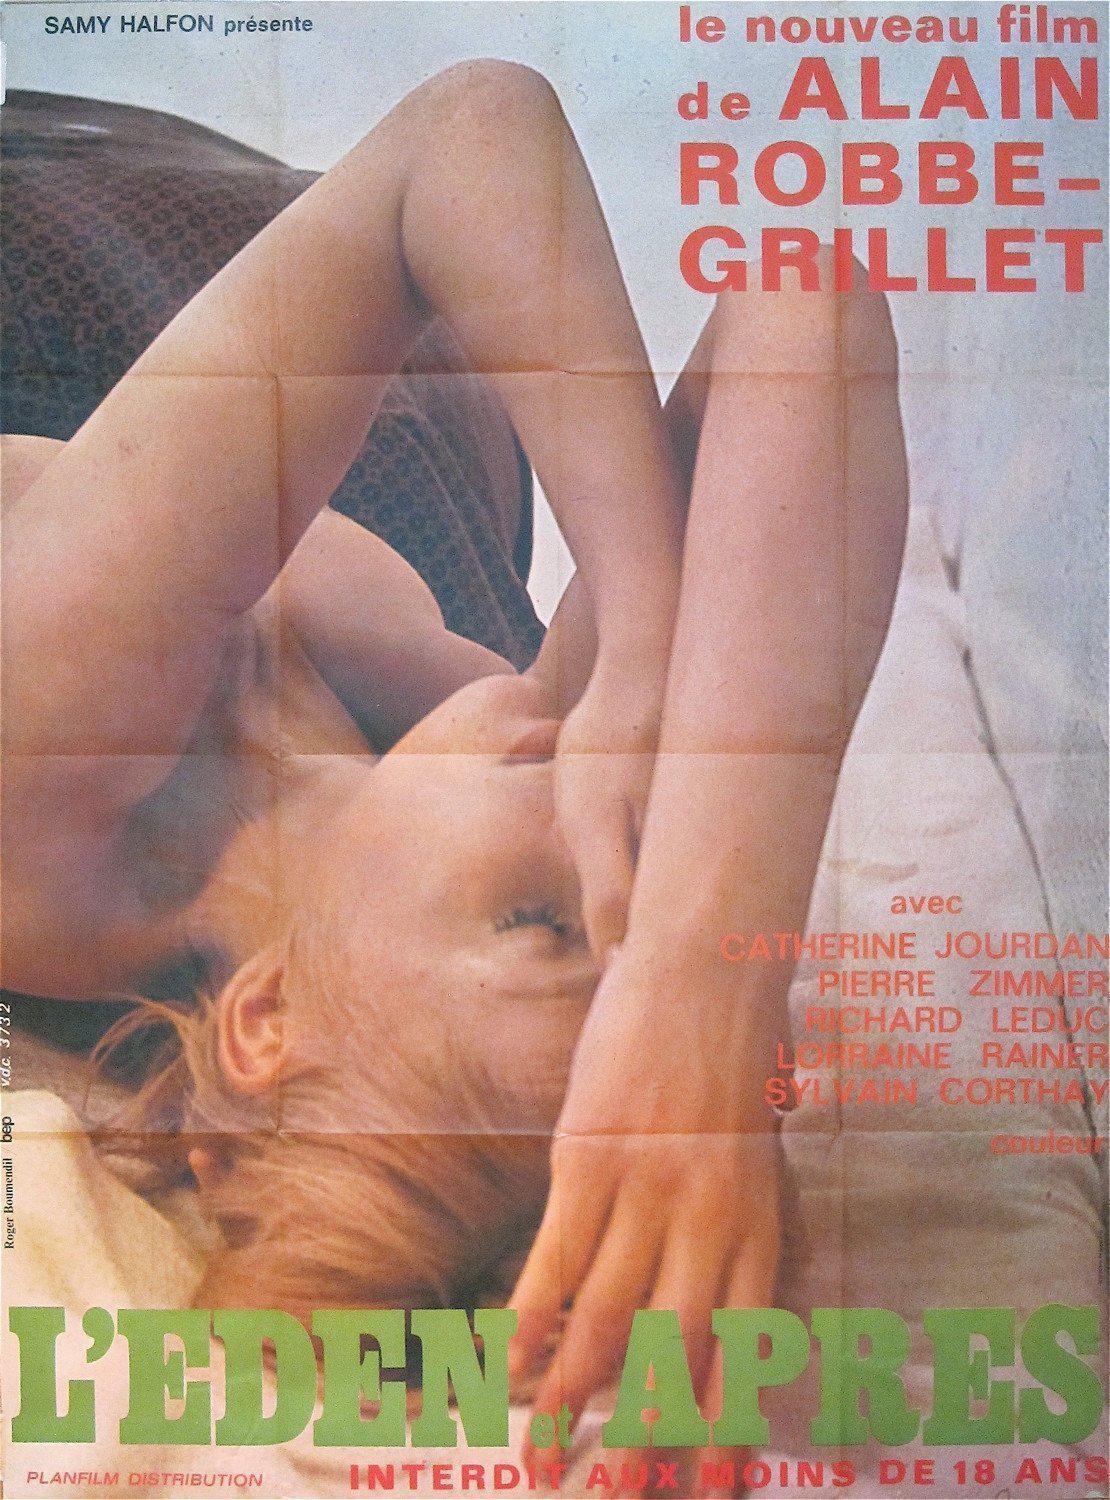 Robbe-Grillet, Alain image